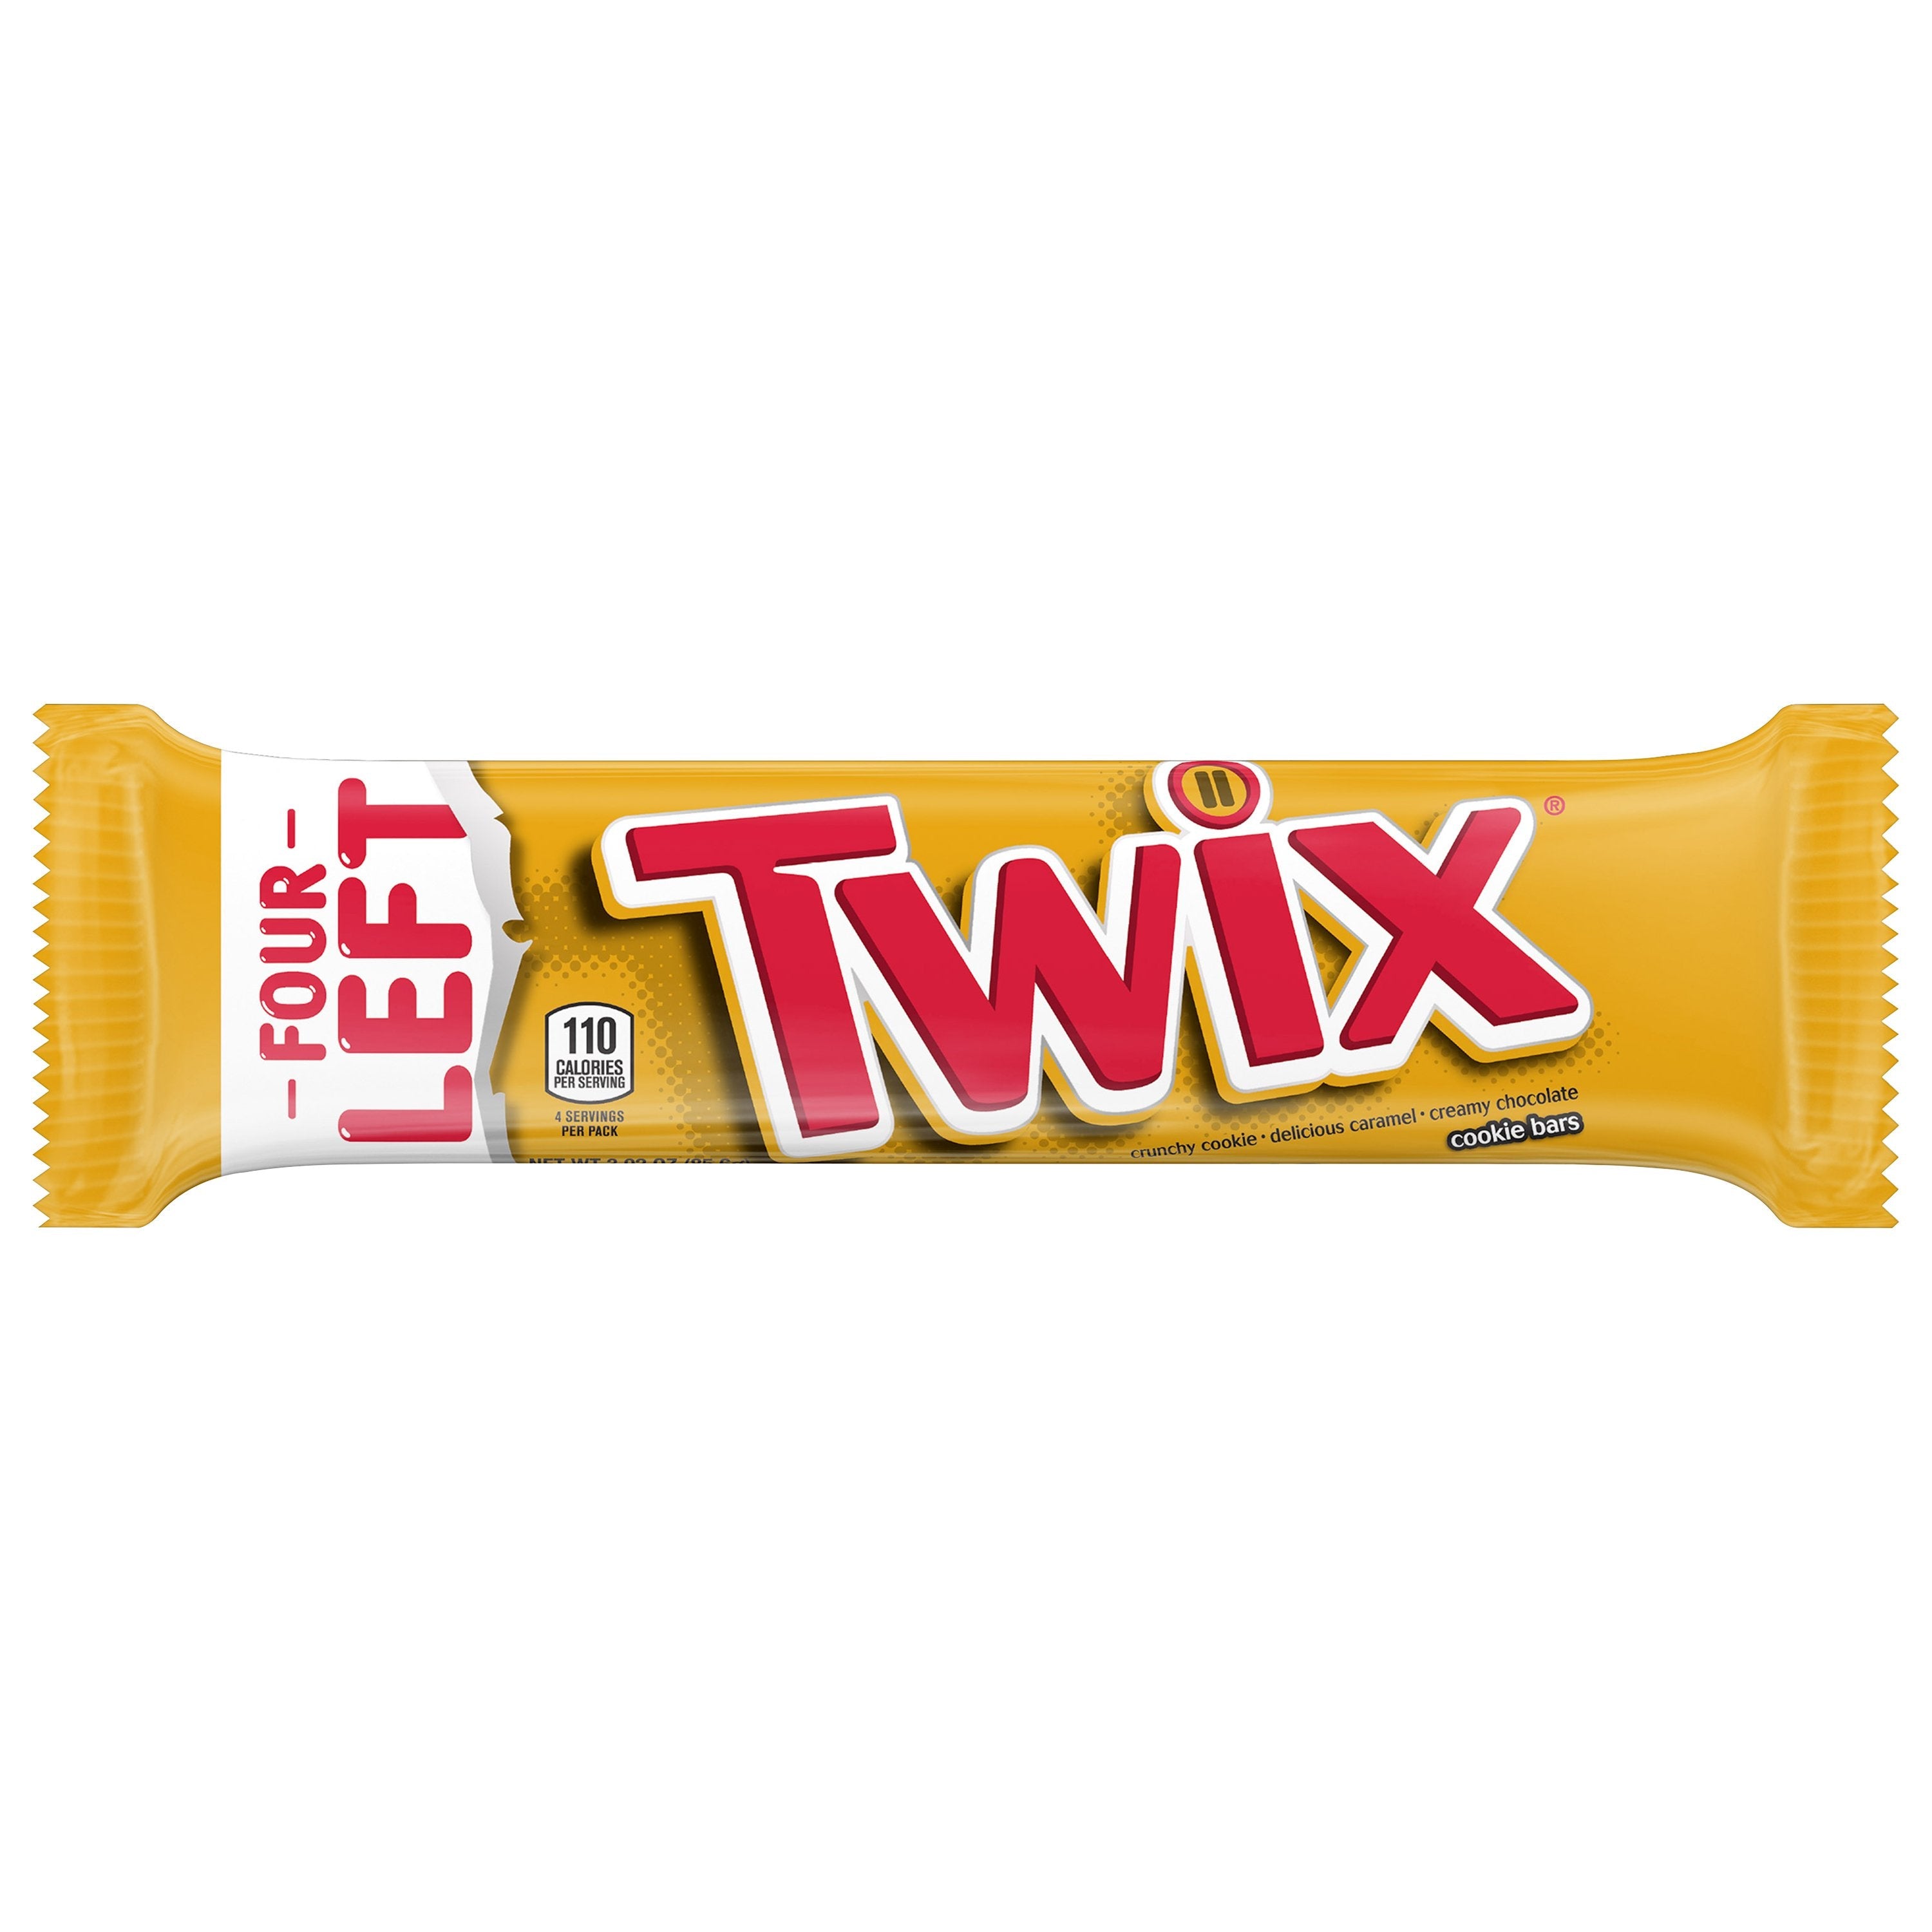 Twix Share Size Chocolate Caramel Cookie Candy Bar, 3.02 oz, 24-count